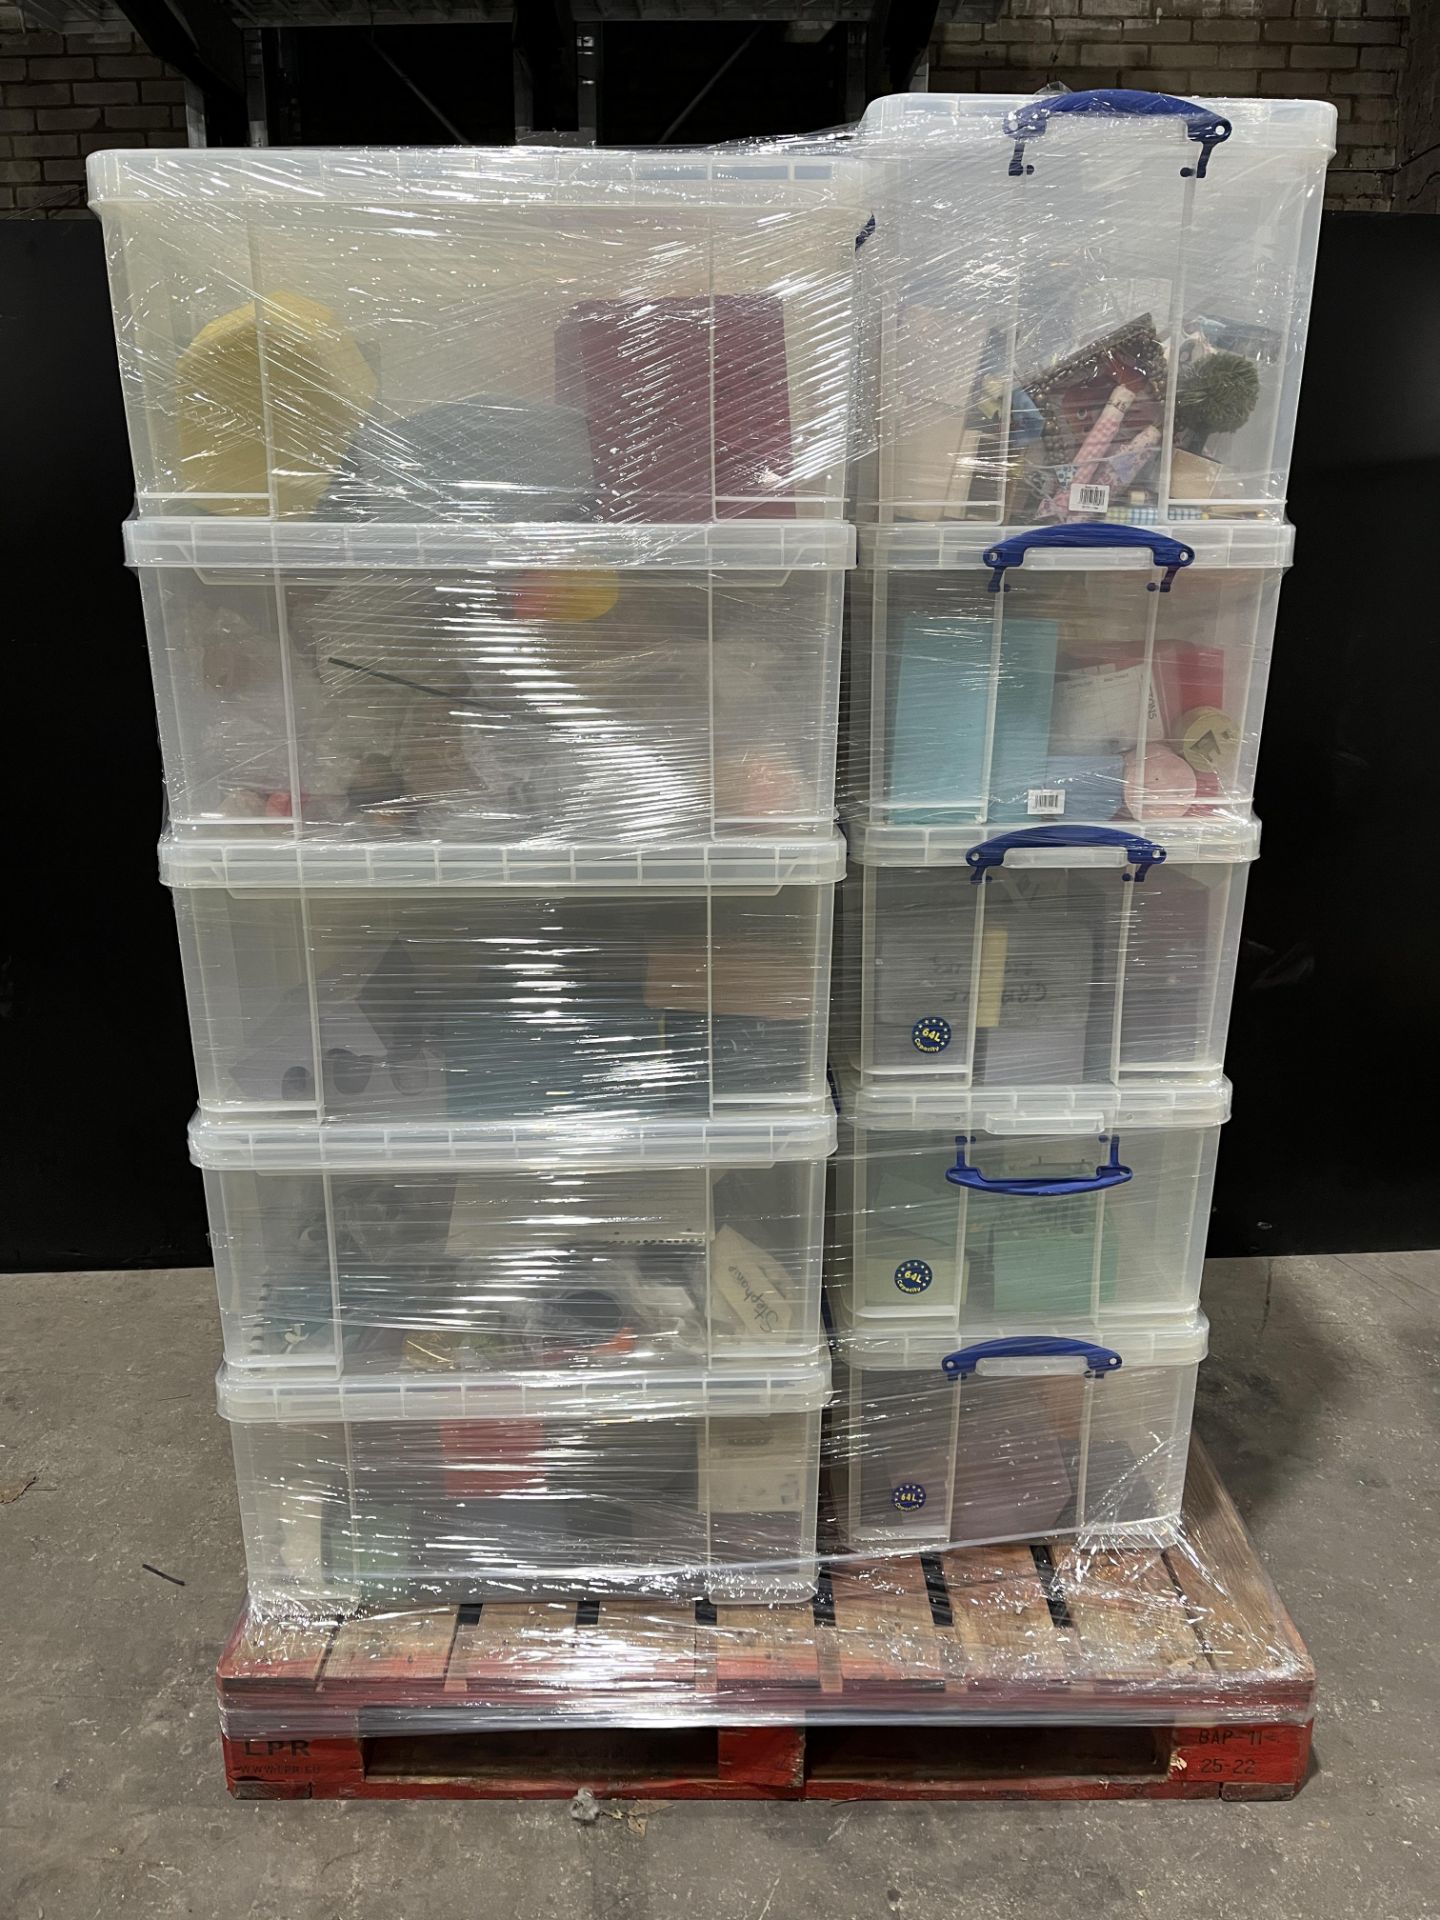 5 x Pallets of Puppets and Accessories for TV Animation 'Strange Hill High' - Image 14 of 42